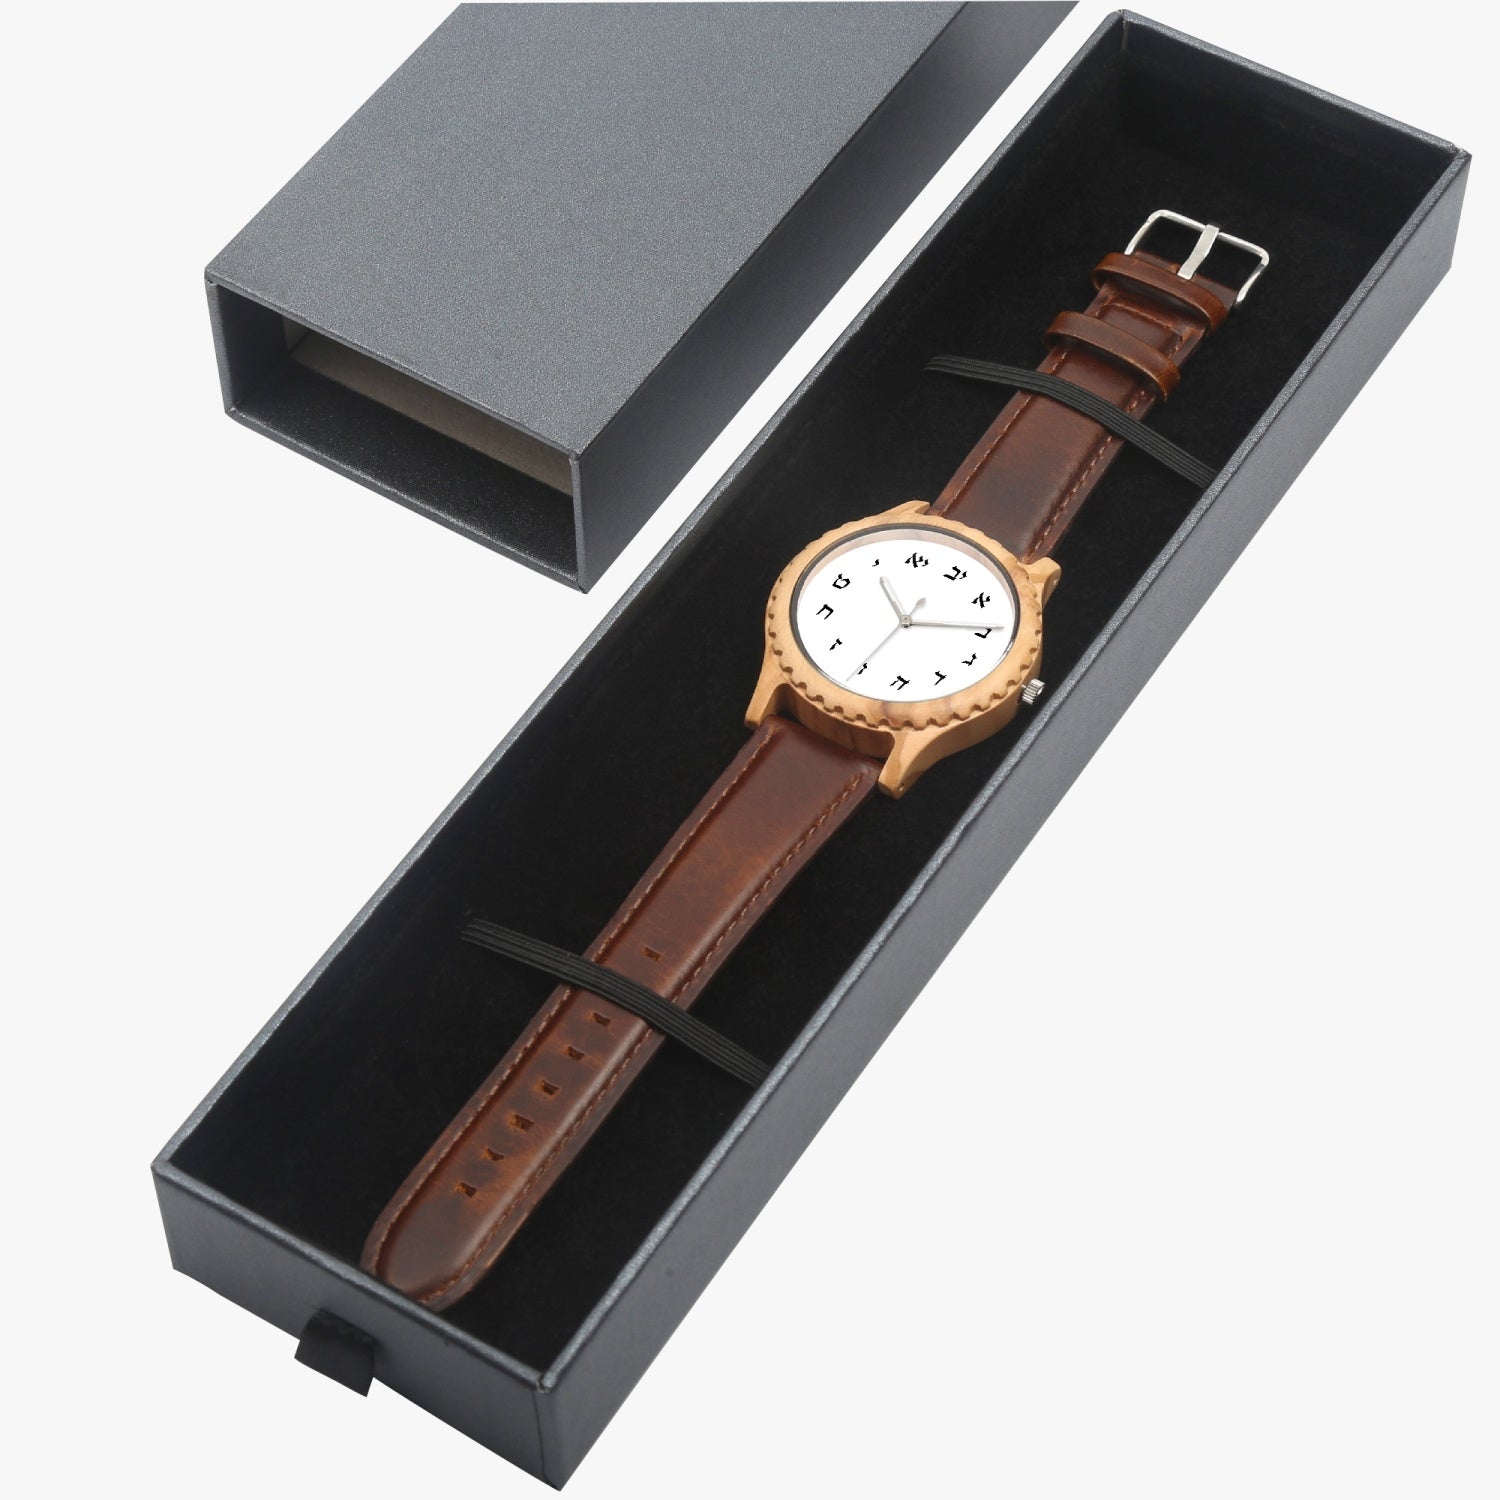 Hebrew Wooden Watch - Brown Leather Strap in box